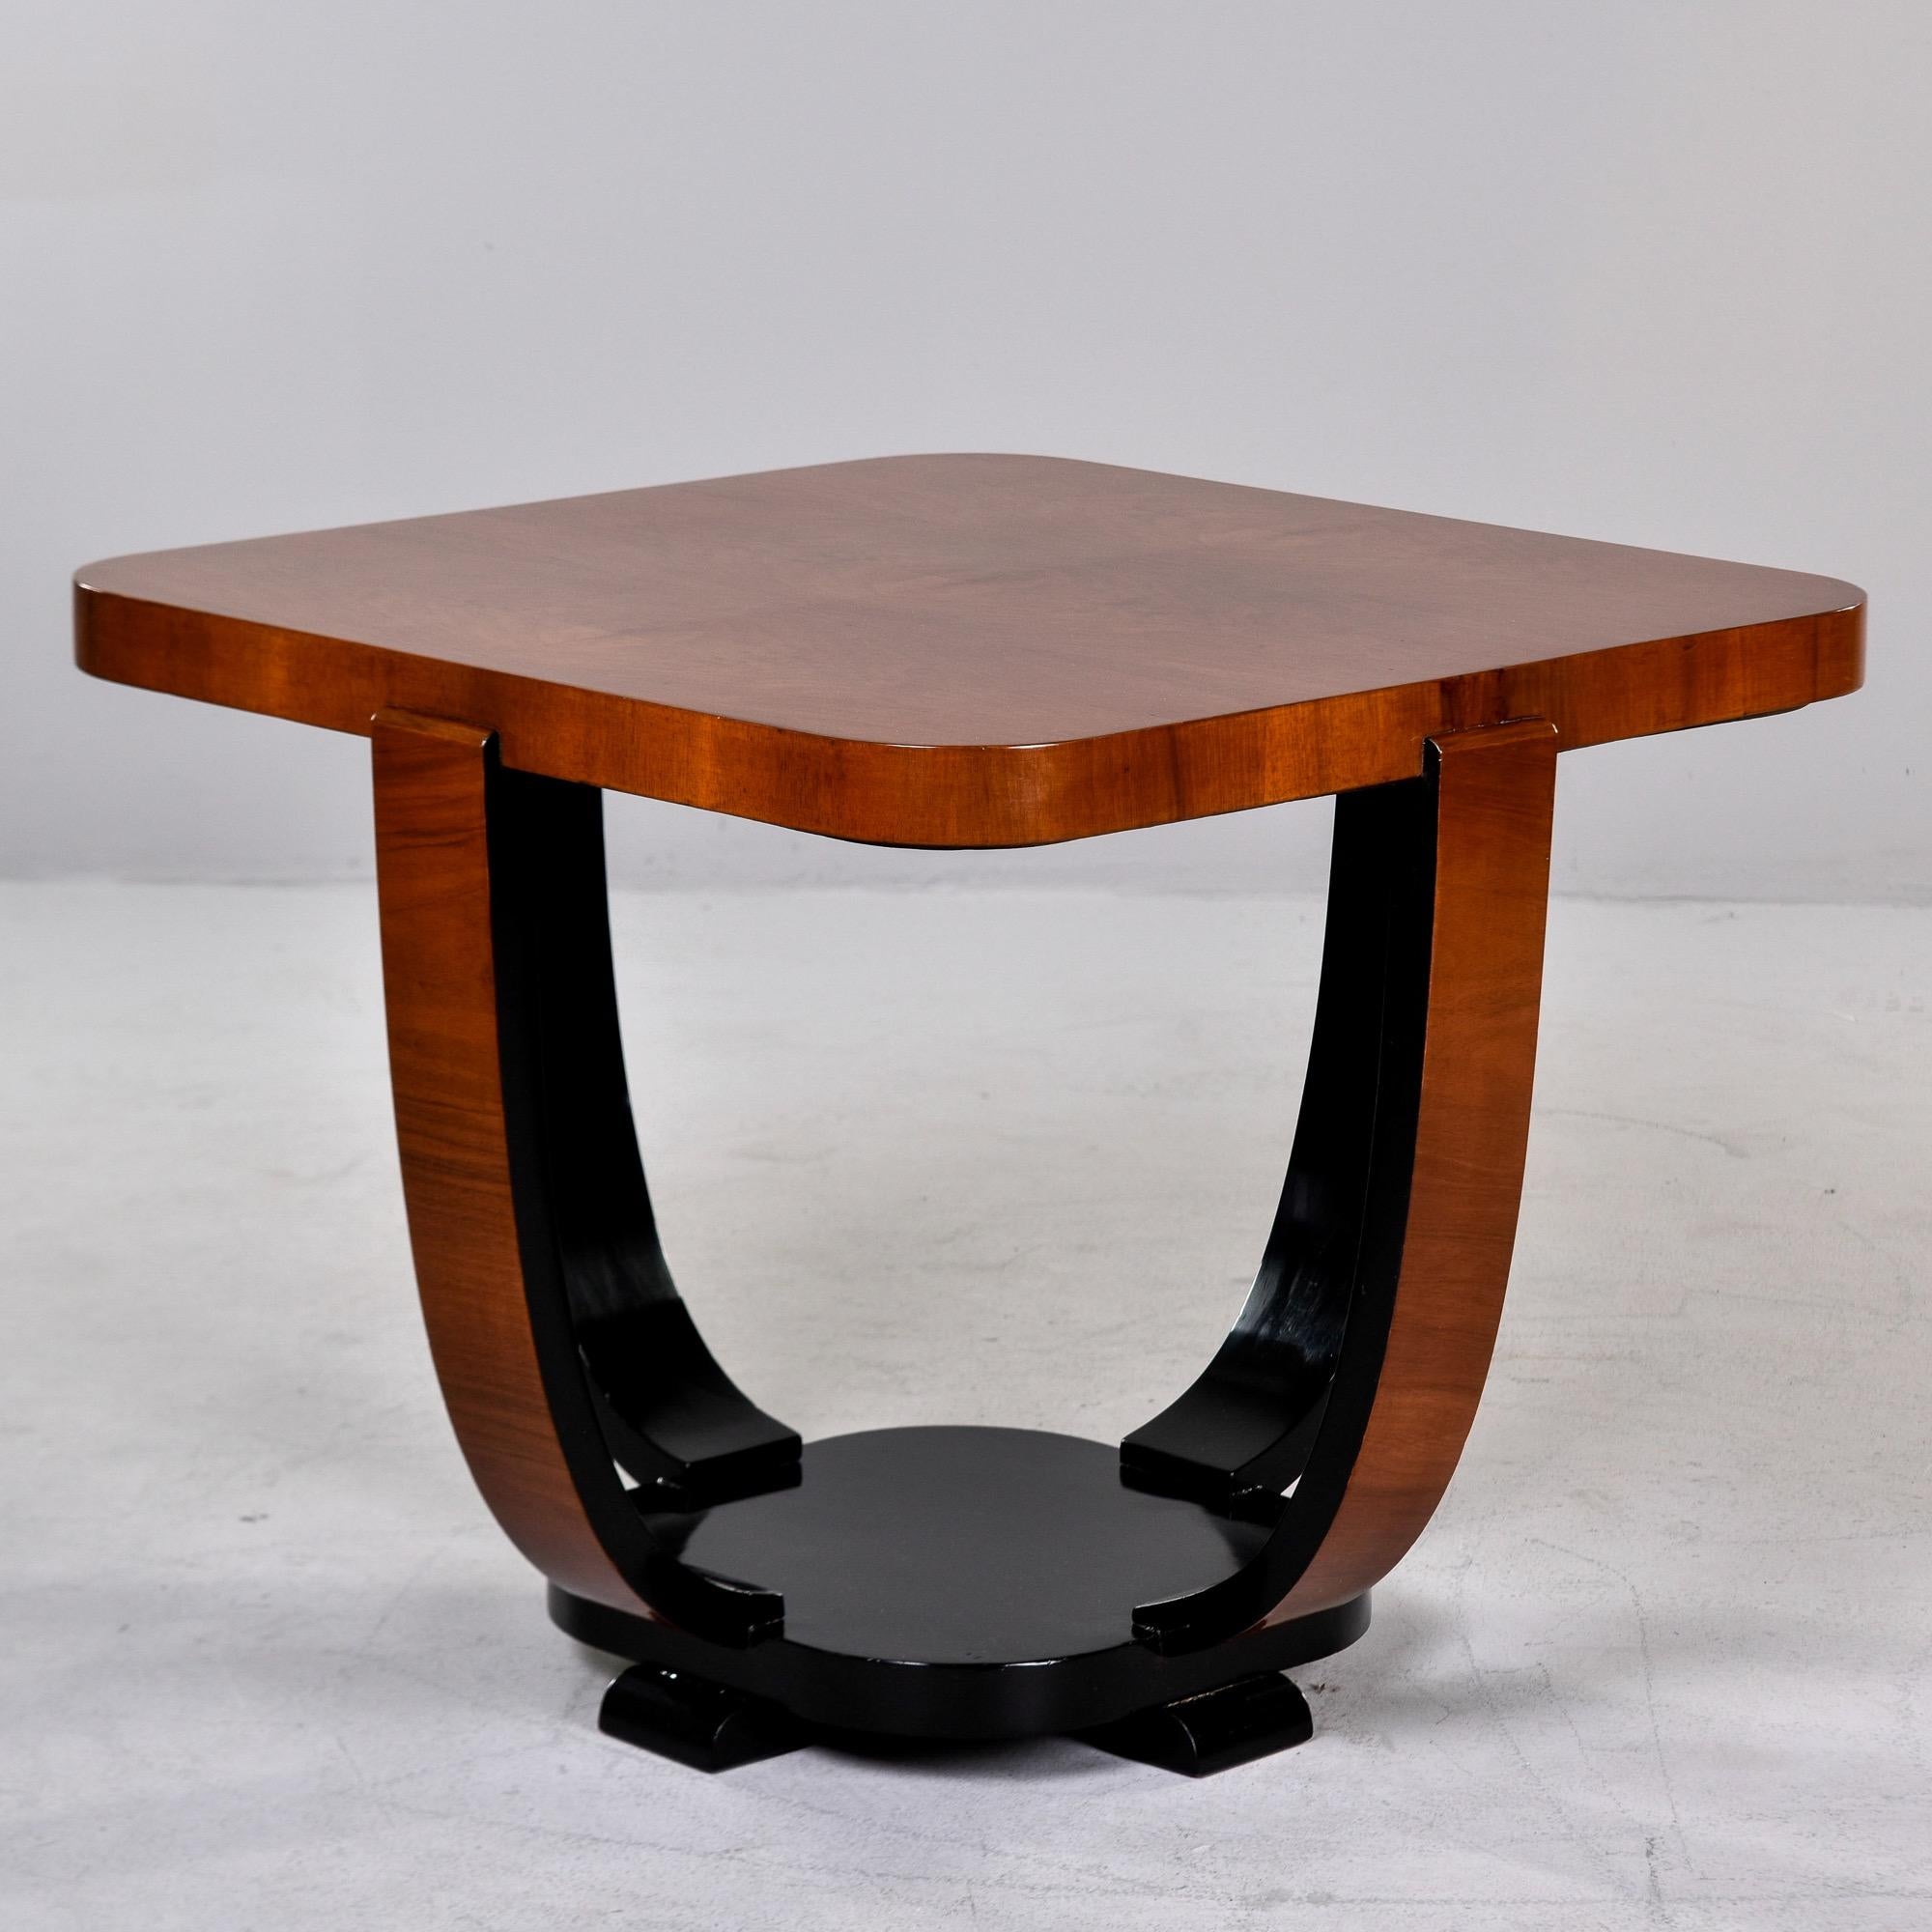 French Art Deco Walnut Square Shaped Side Table with Black Detailing